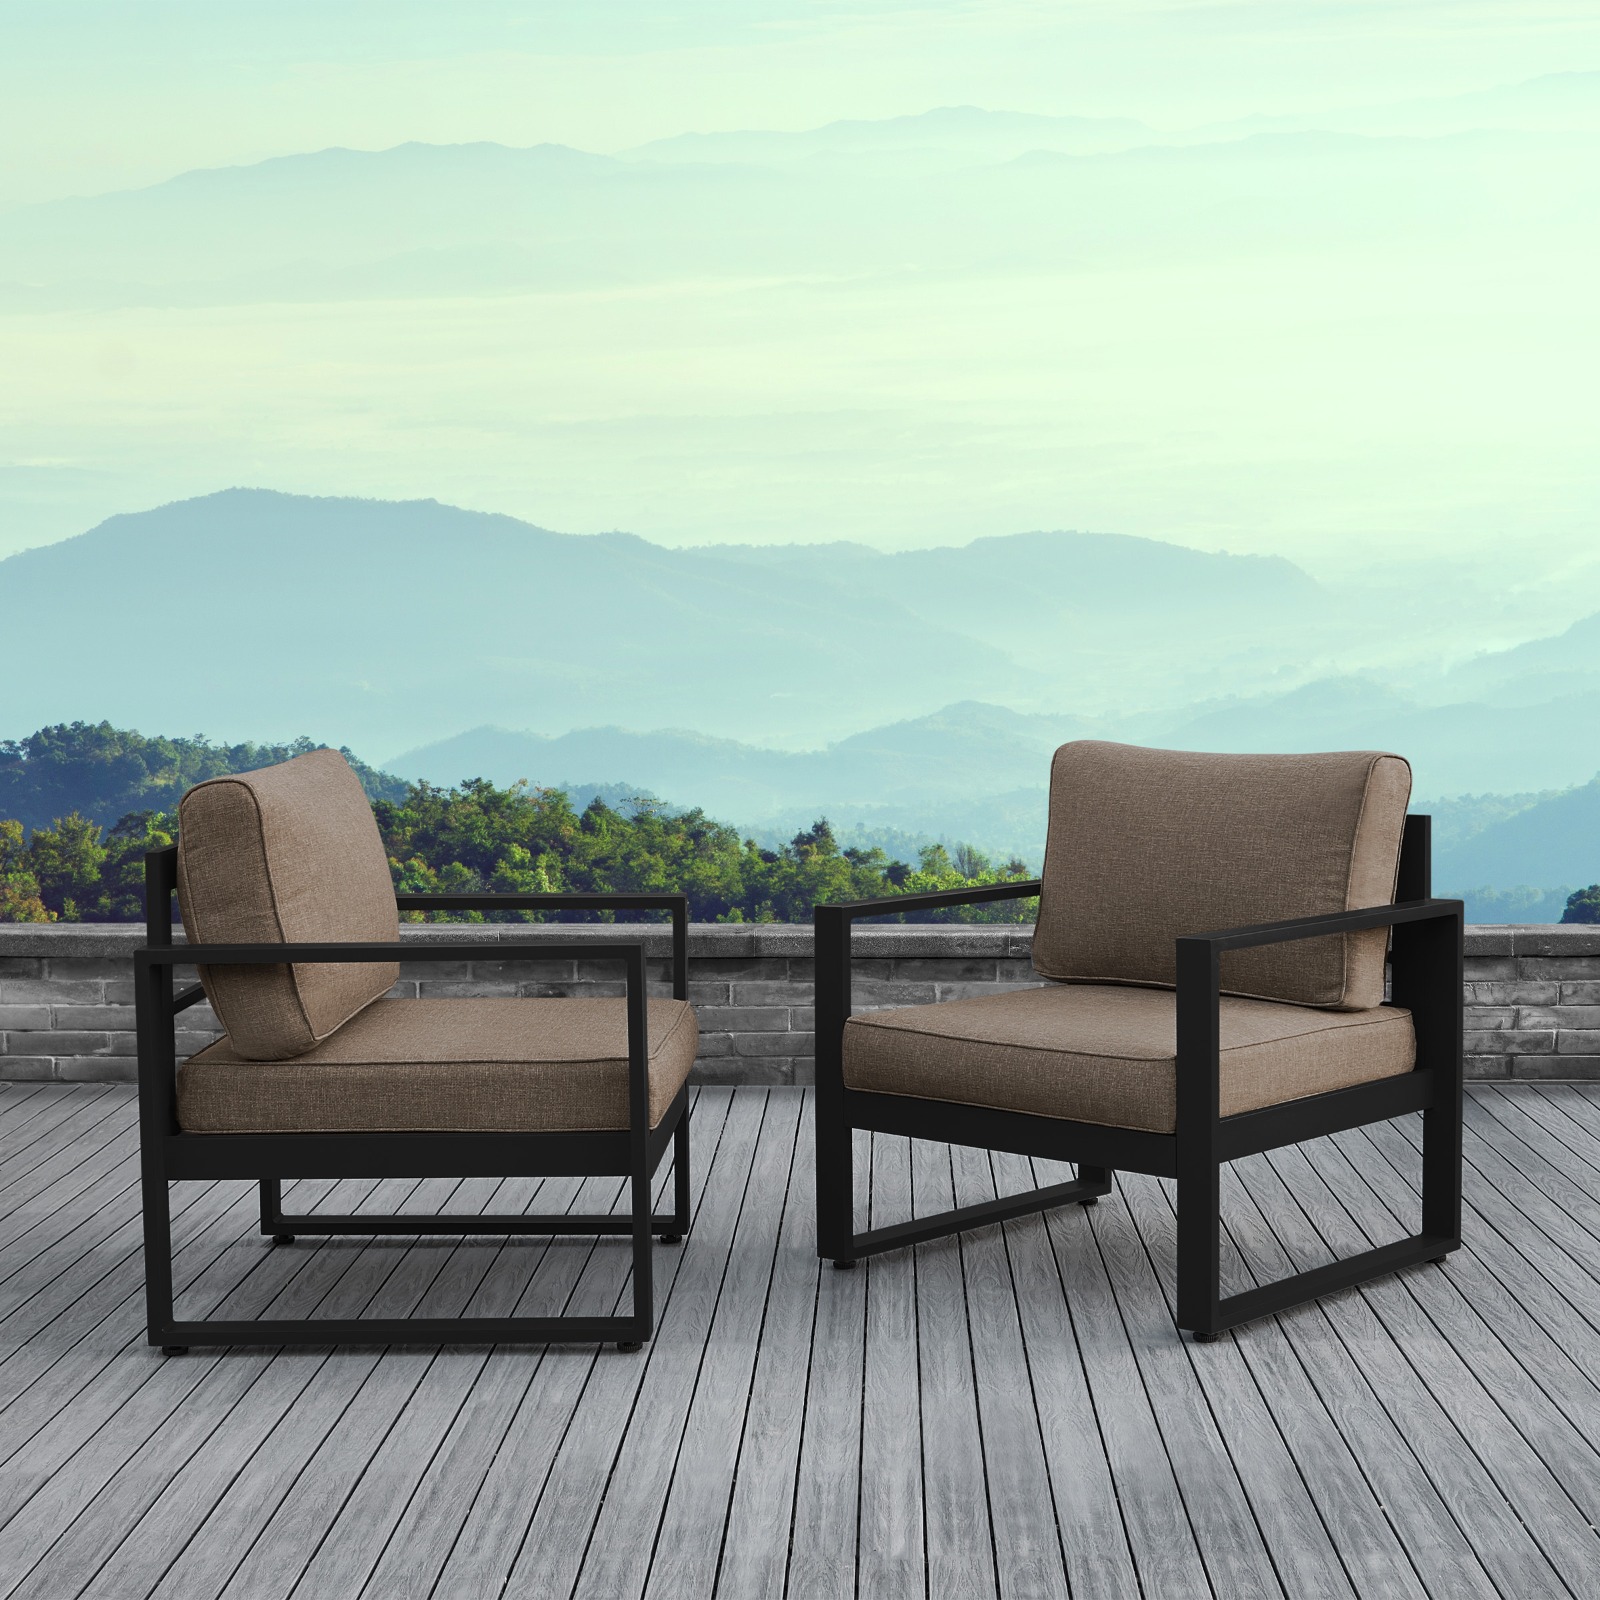 Baltic Outdoor Chair Set Patio Chair Set Patio Furniture